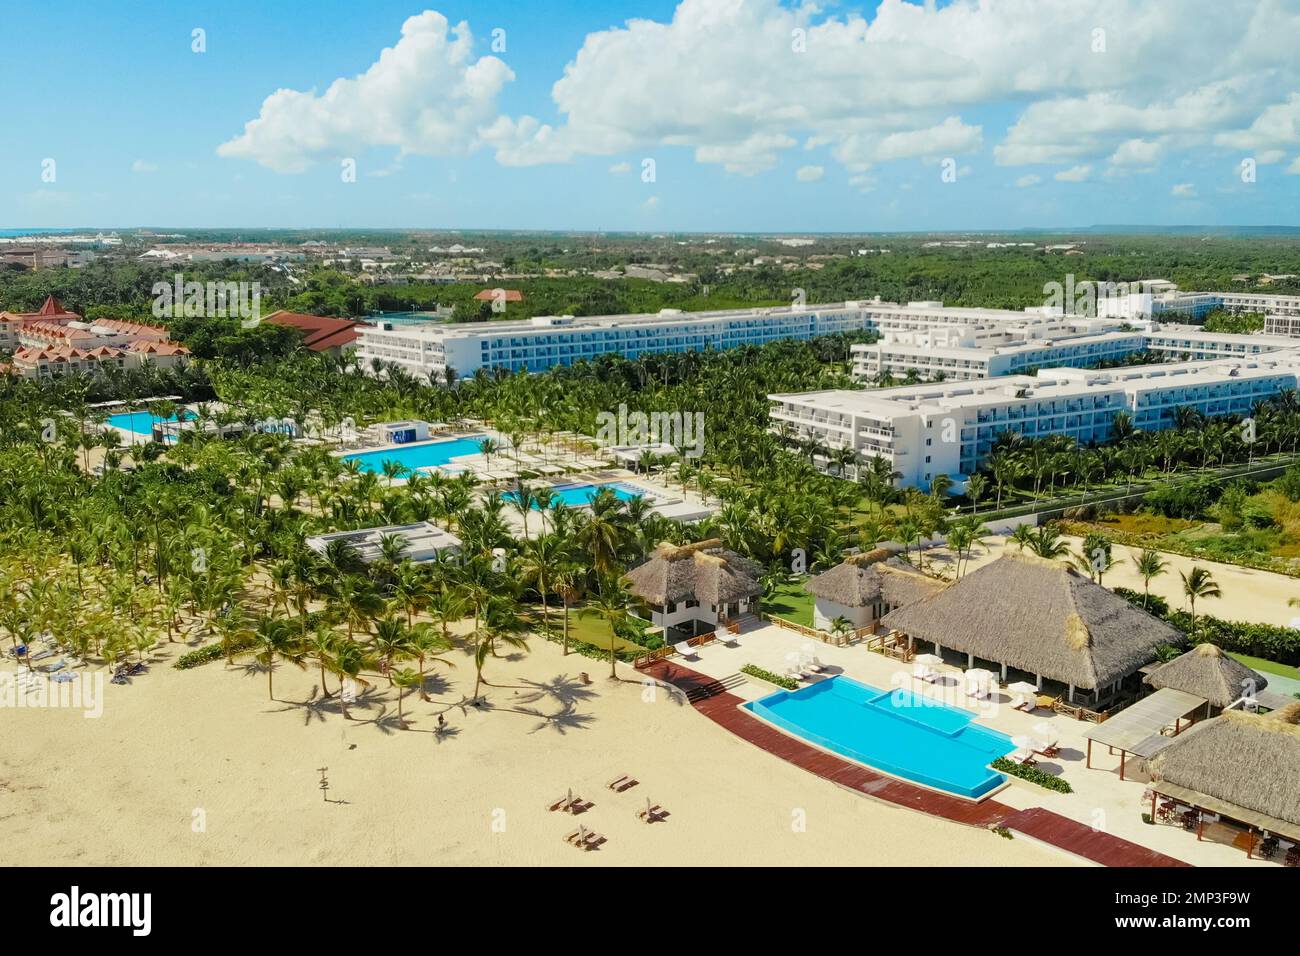 Pool area and bars in a tropical tourist resort, lux hotel in Caribbean, aerial view of luxury hotel with exotic poolside. Aerial view of luxury tropical resort.Drone view of resort with swimming pool Stock Photo